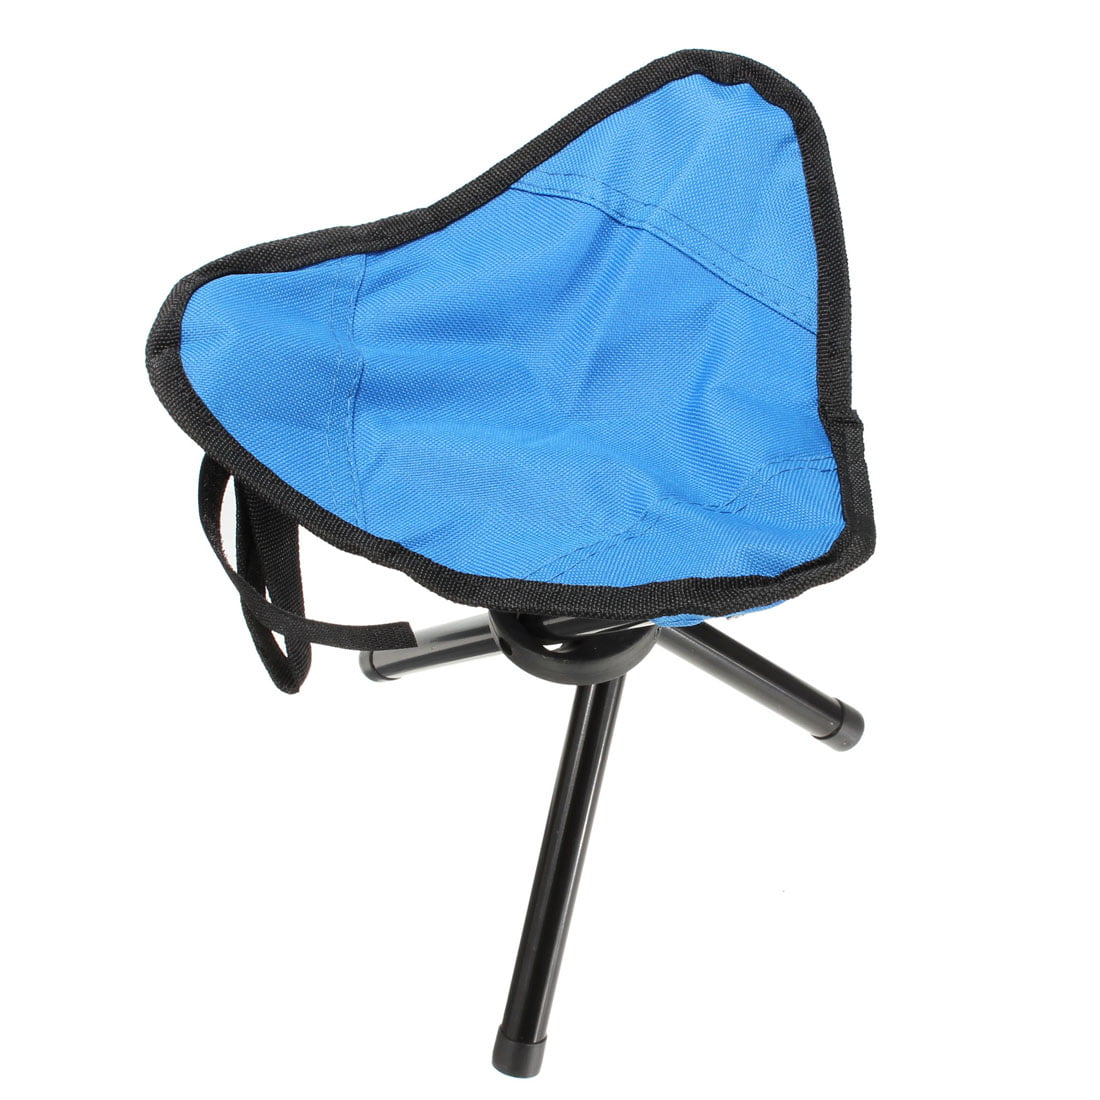 D DOLITY Folding Stool Small Lightweight Portable 3 Legs Chair Tripod Seat Outdoor Foldable Tripod Camping Chair 